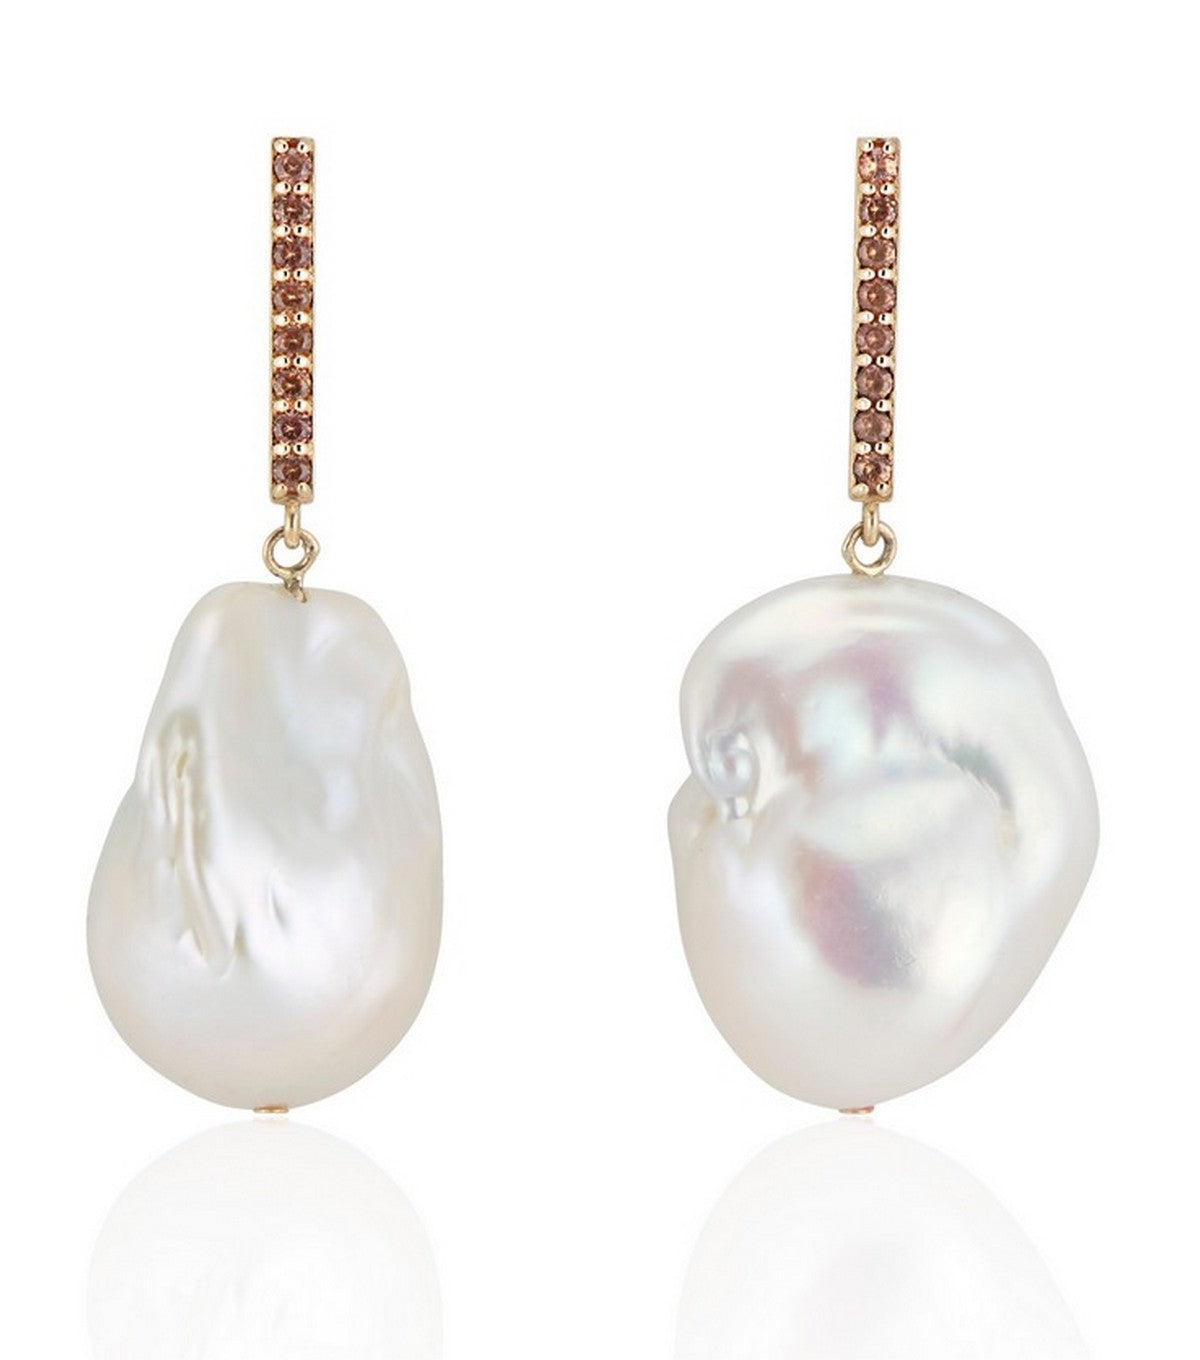 14K Vertical Gold Bar with Sapphires and Baroque Pearl Drop Earrings - Thomas Laine Jewelry